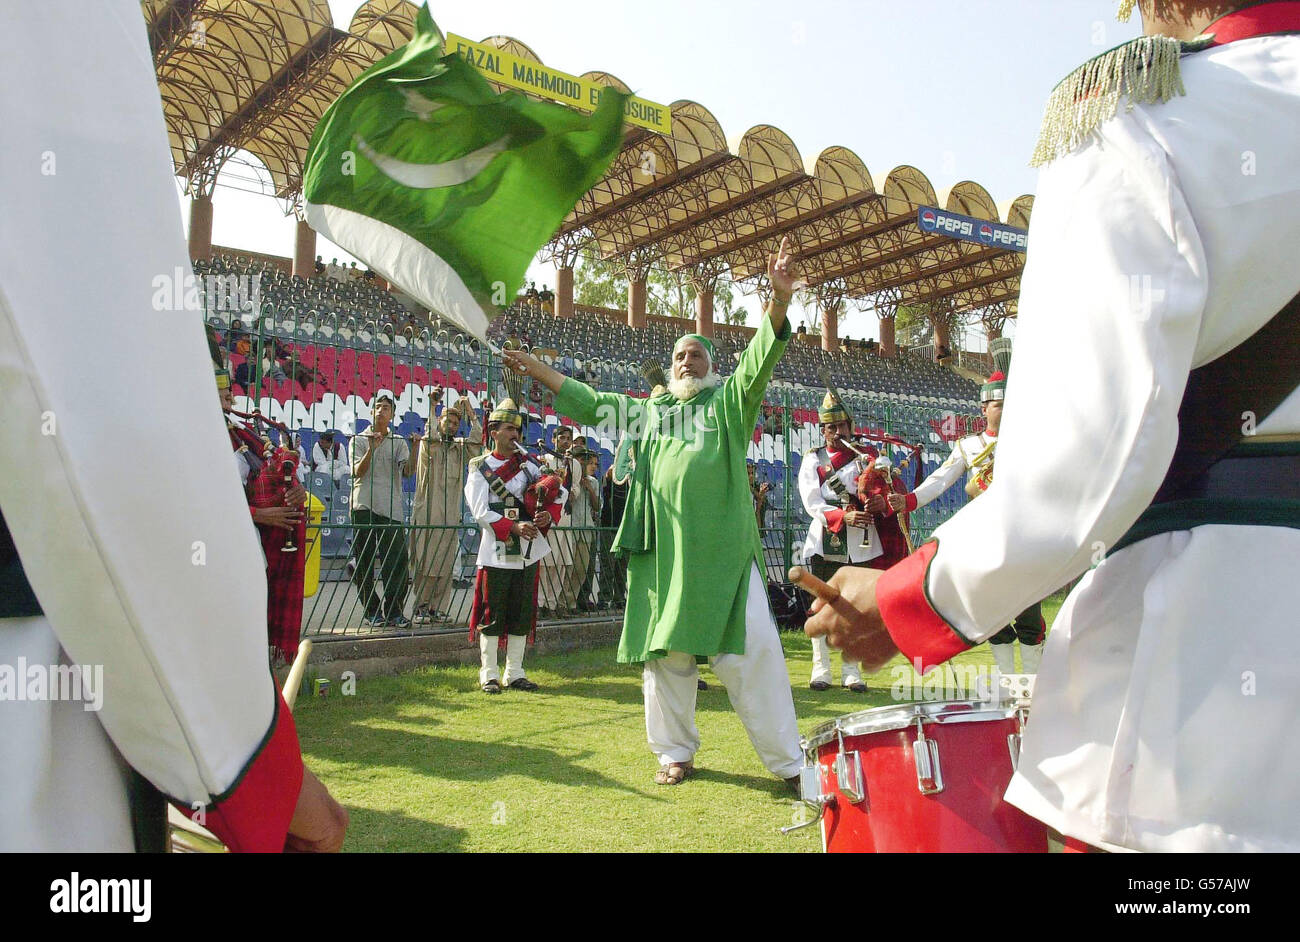 Pakistani cricket fan Abdul Jalil, who is known as 'Uncle Cricket', enjoys the music of the Pakistan Ground Army Pipe Band (Azad Kashmir Regiment) during the final day of the first test match between England and Pakistan at Lahore. Stock Photo